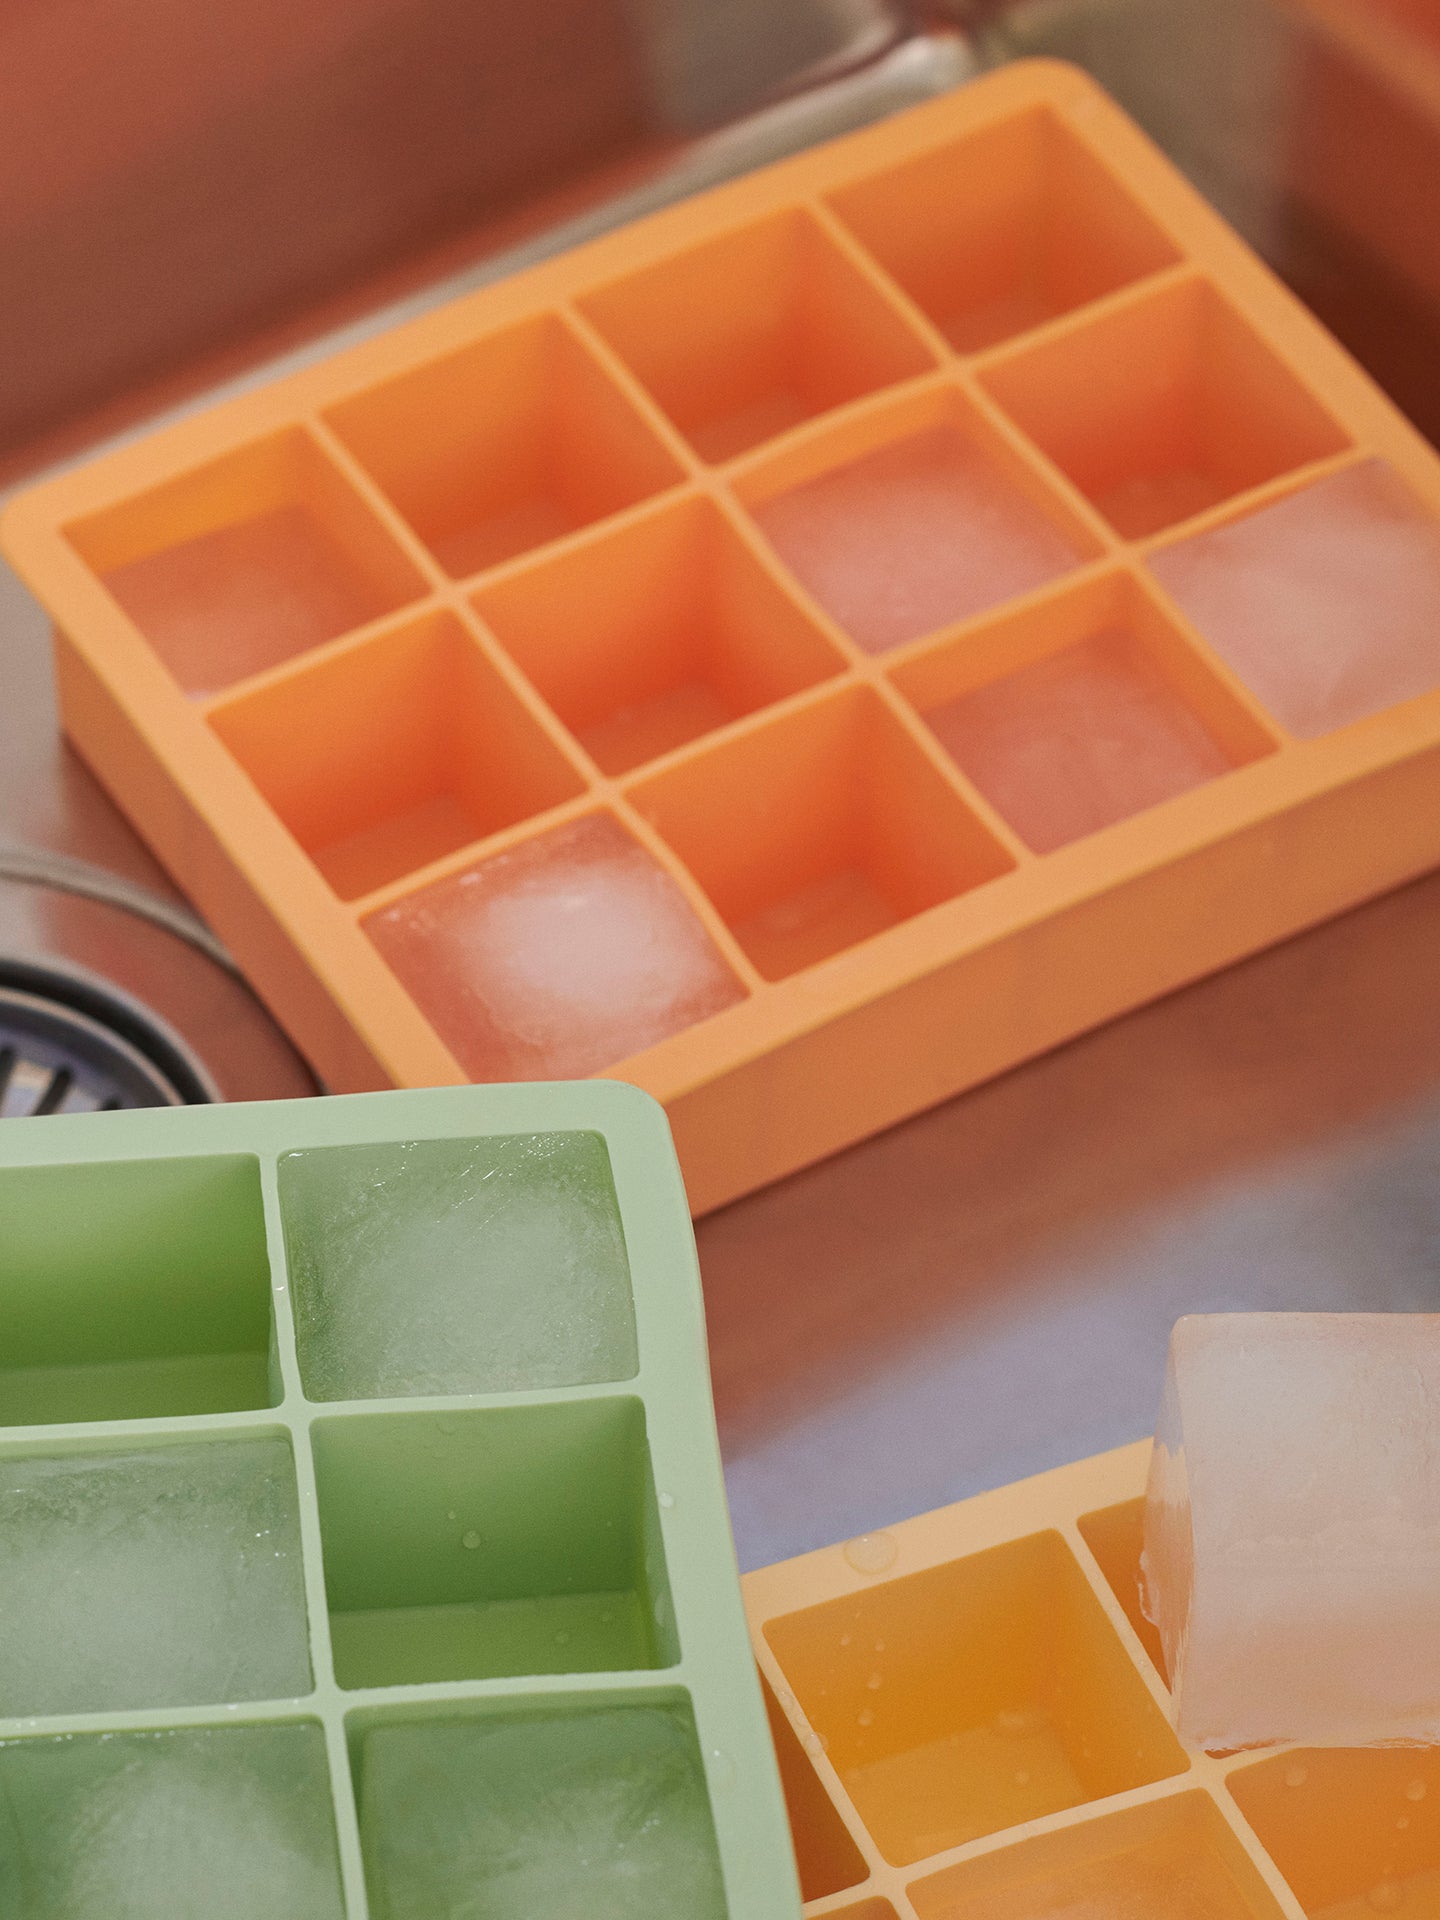 Square Ice Cube Tray XL (4 colours)